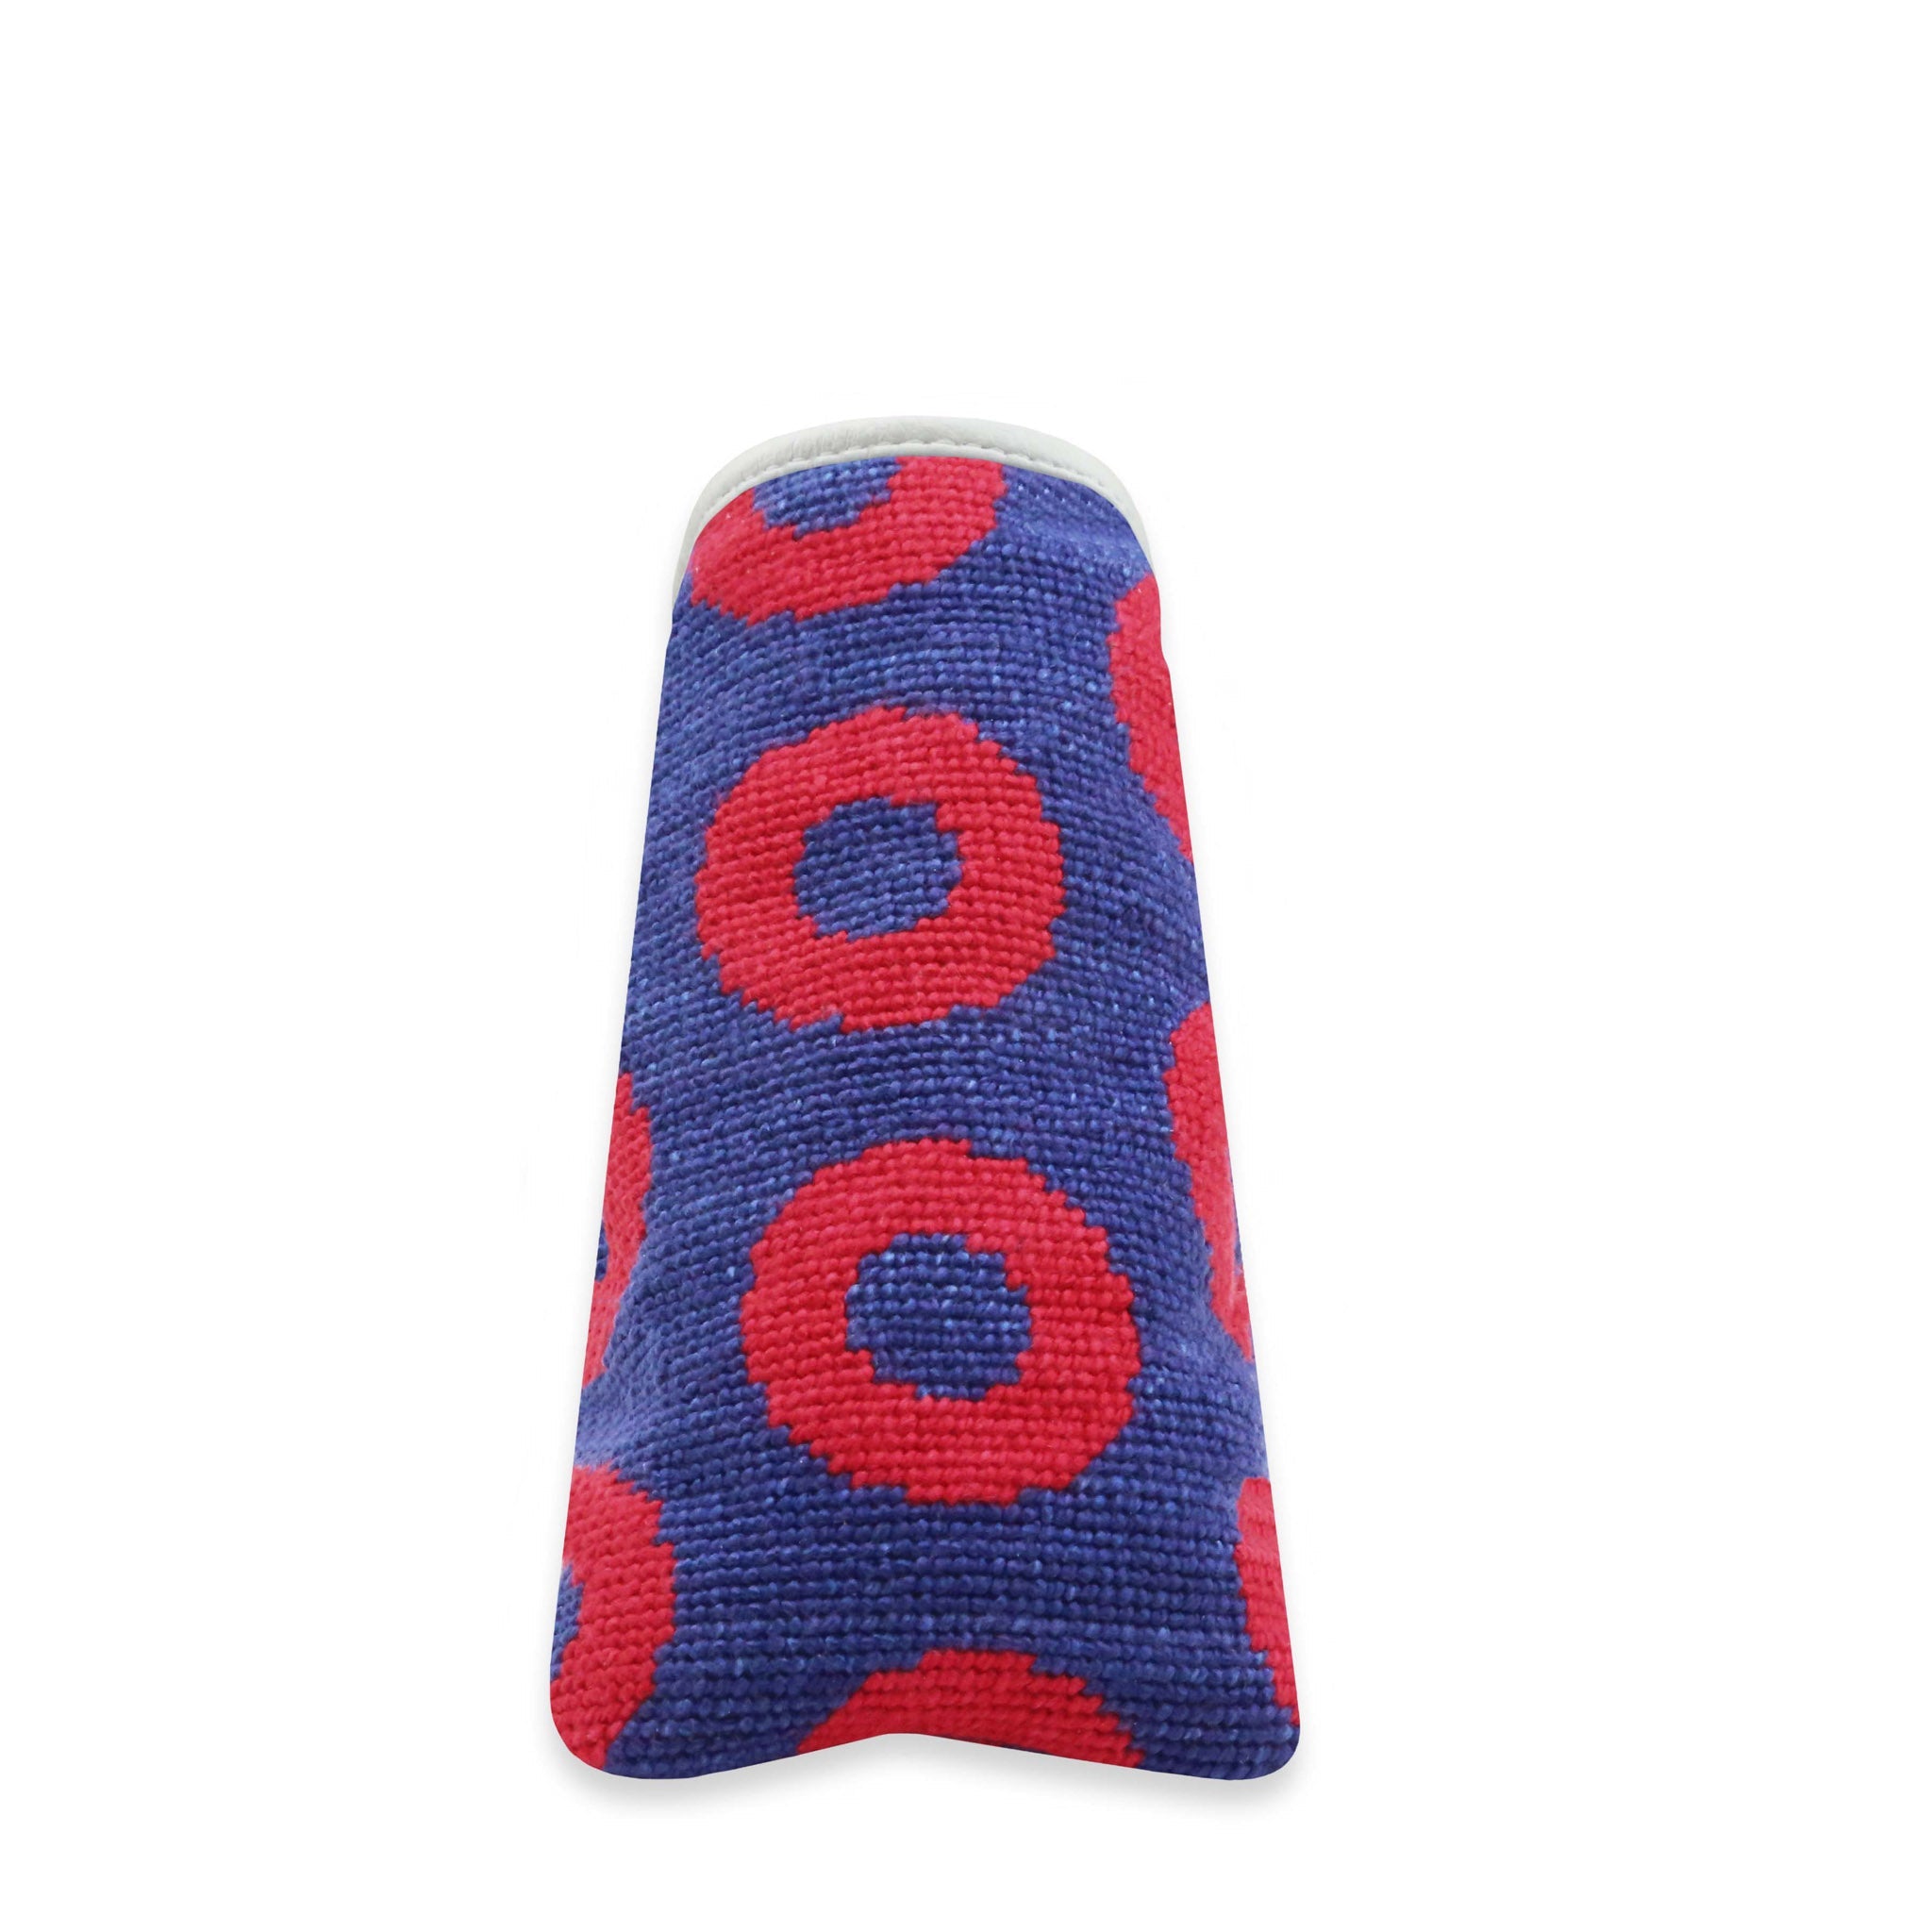 Smathers and Branson The Donut Pattern Needlepoint Putter Headcover Classic Navy - Red Donuts    